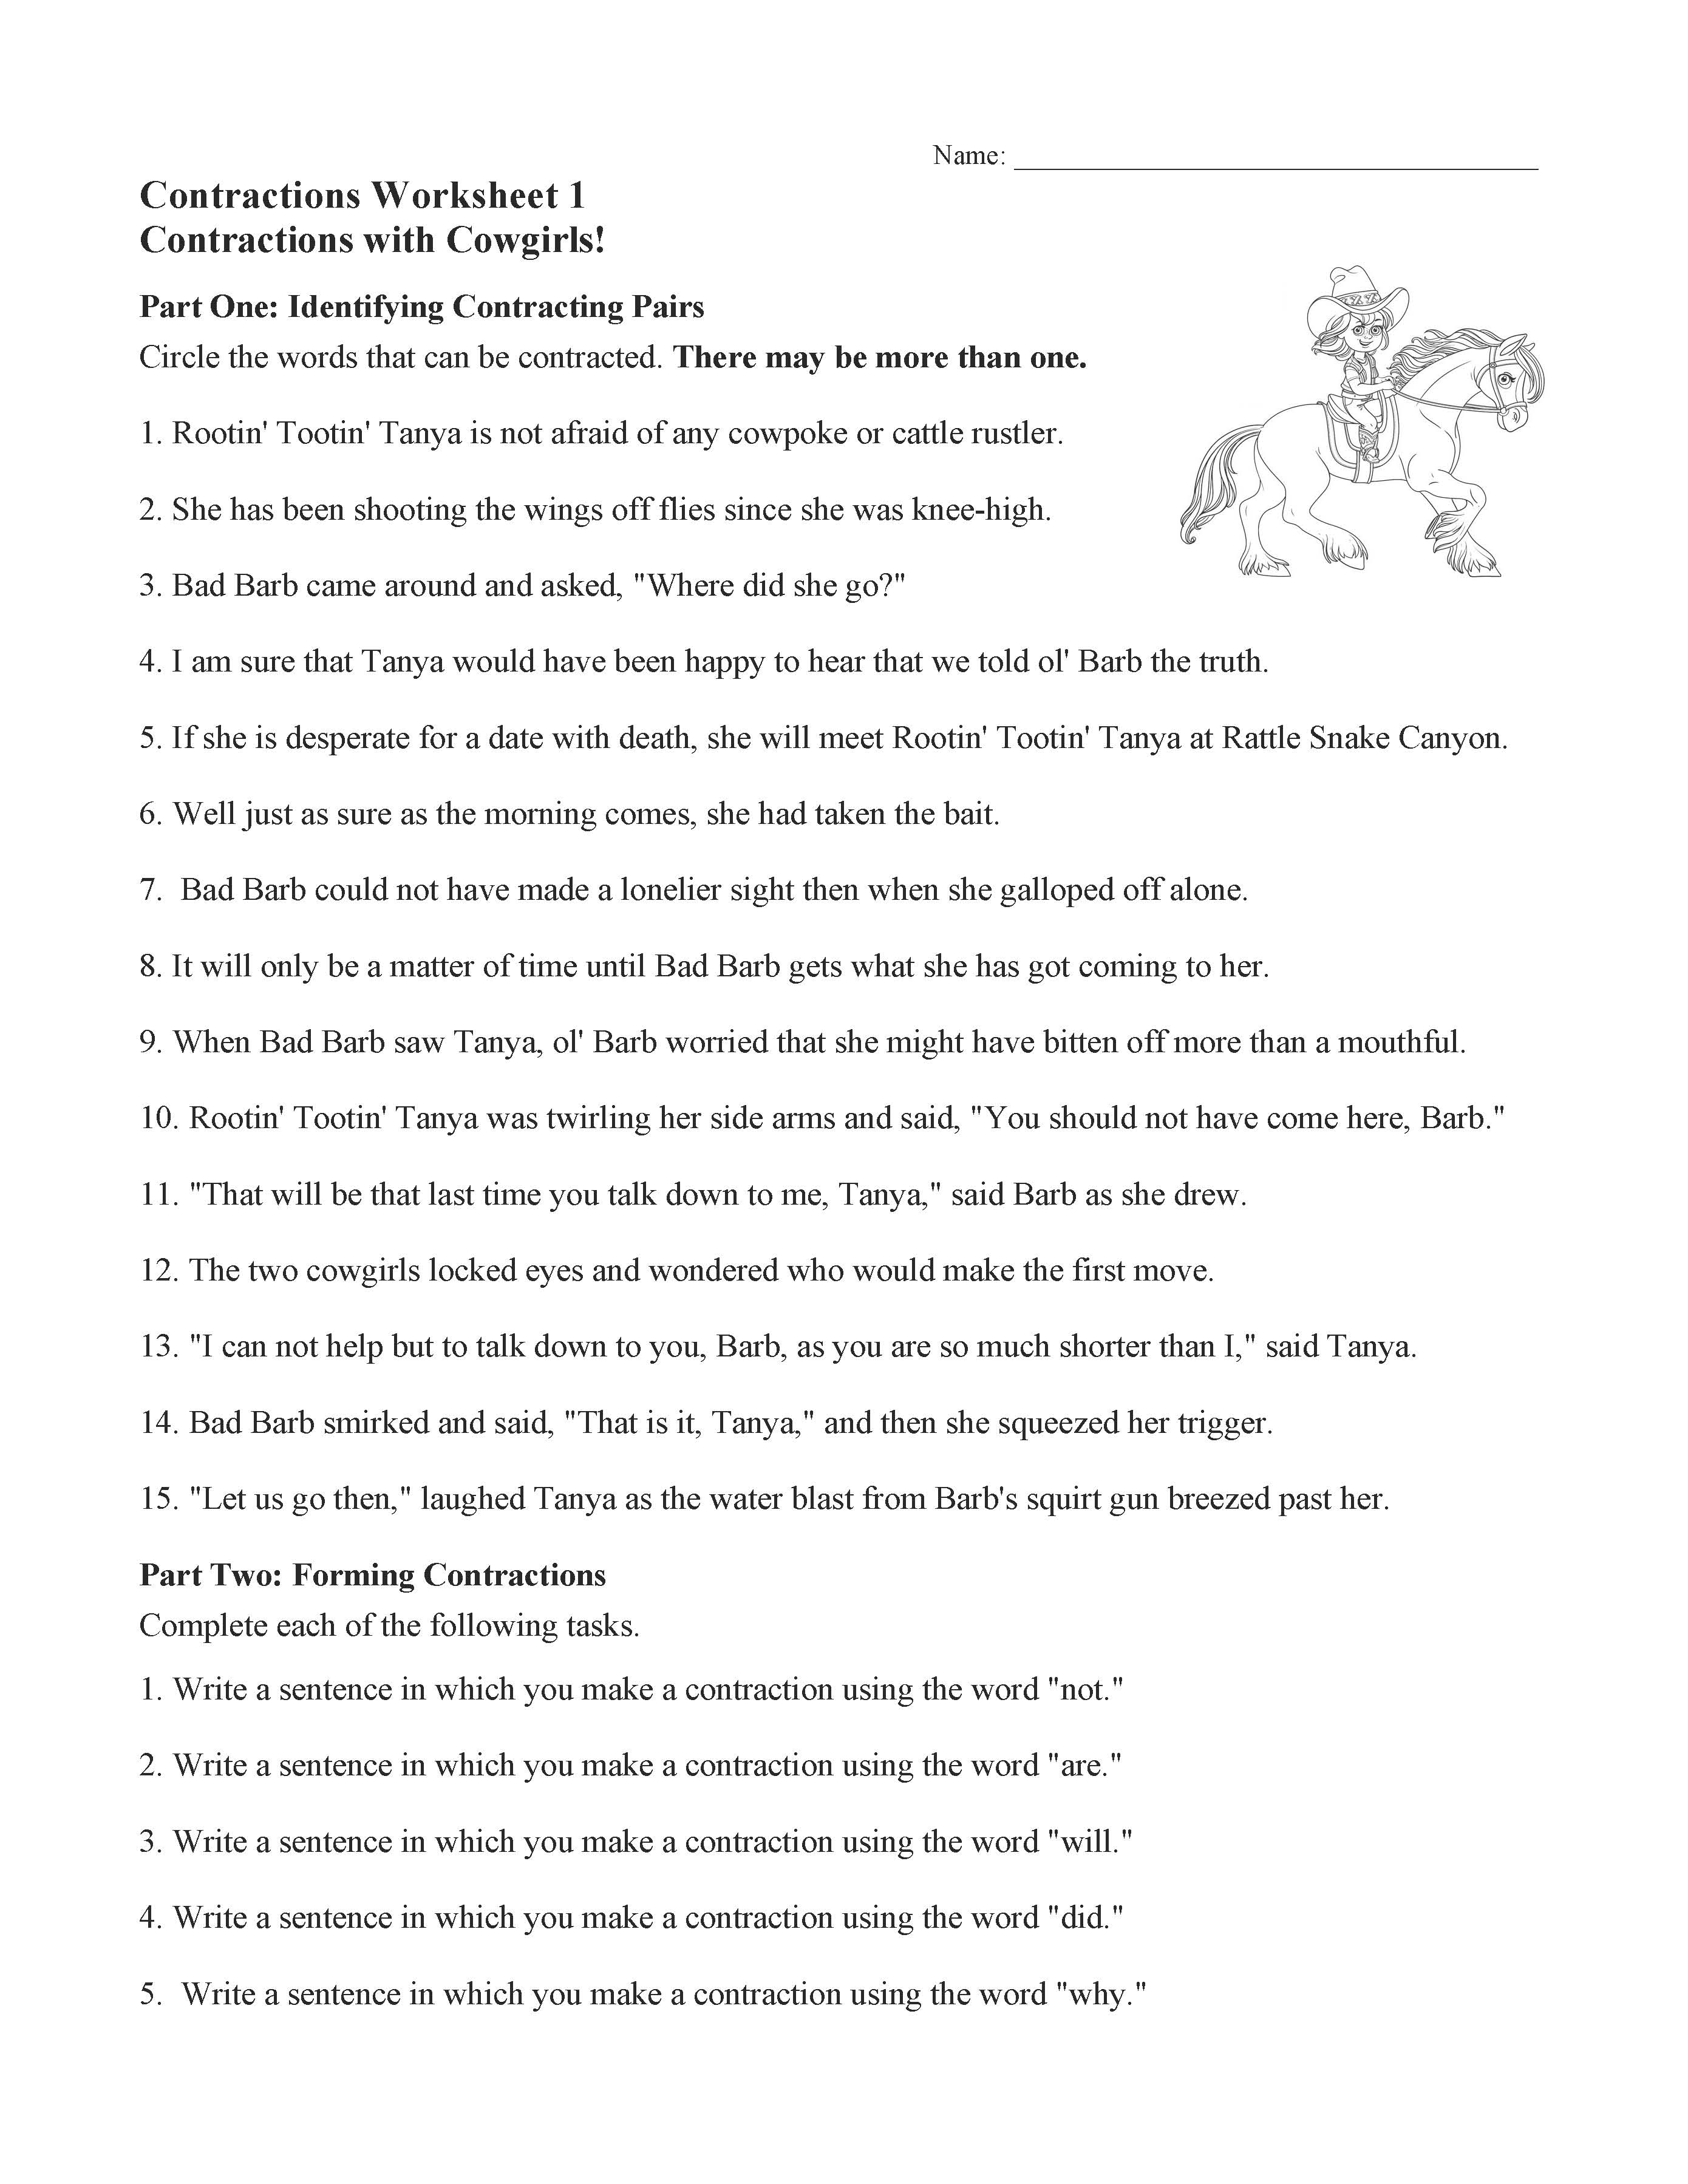 contractions-worksheet-1-preview